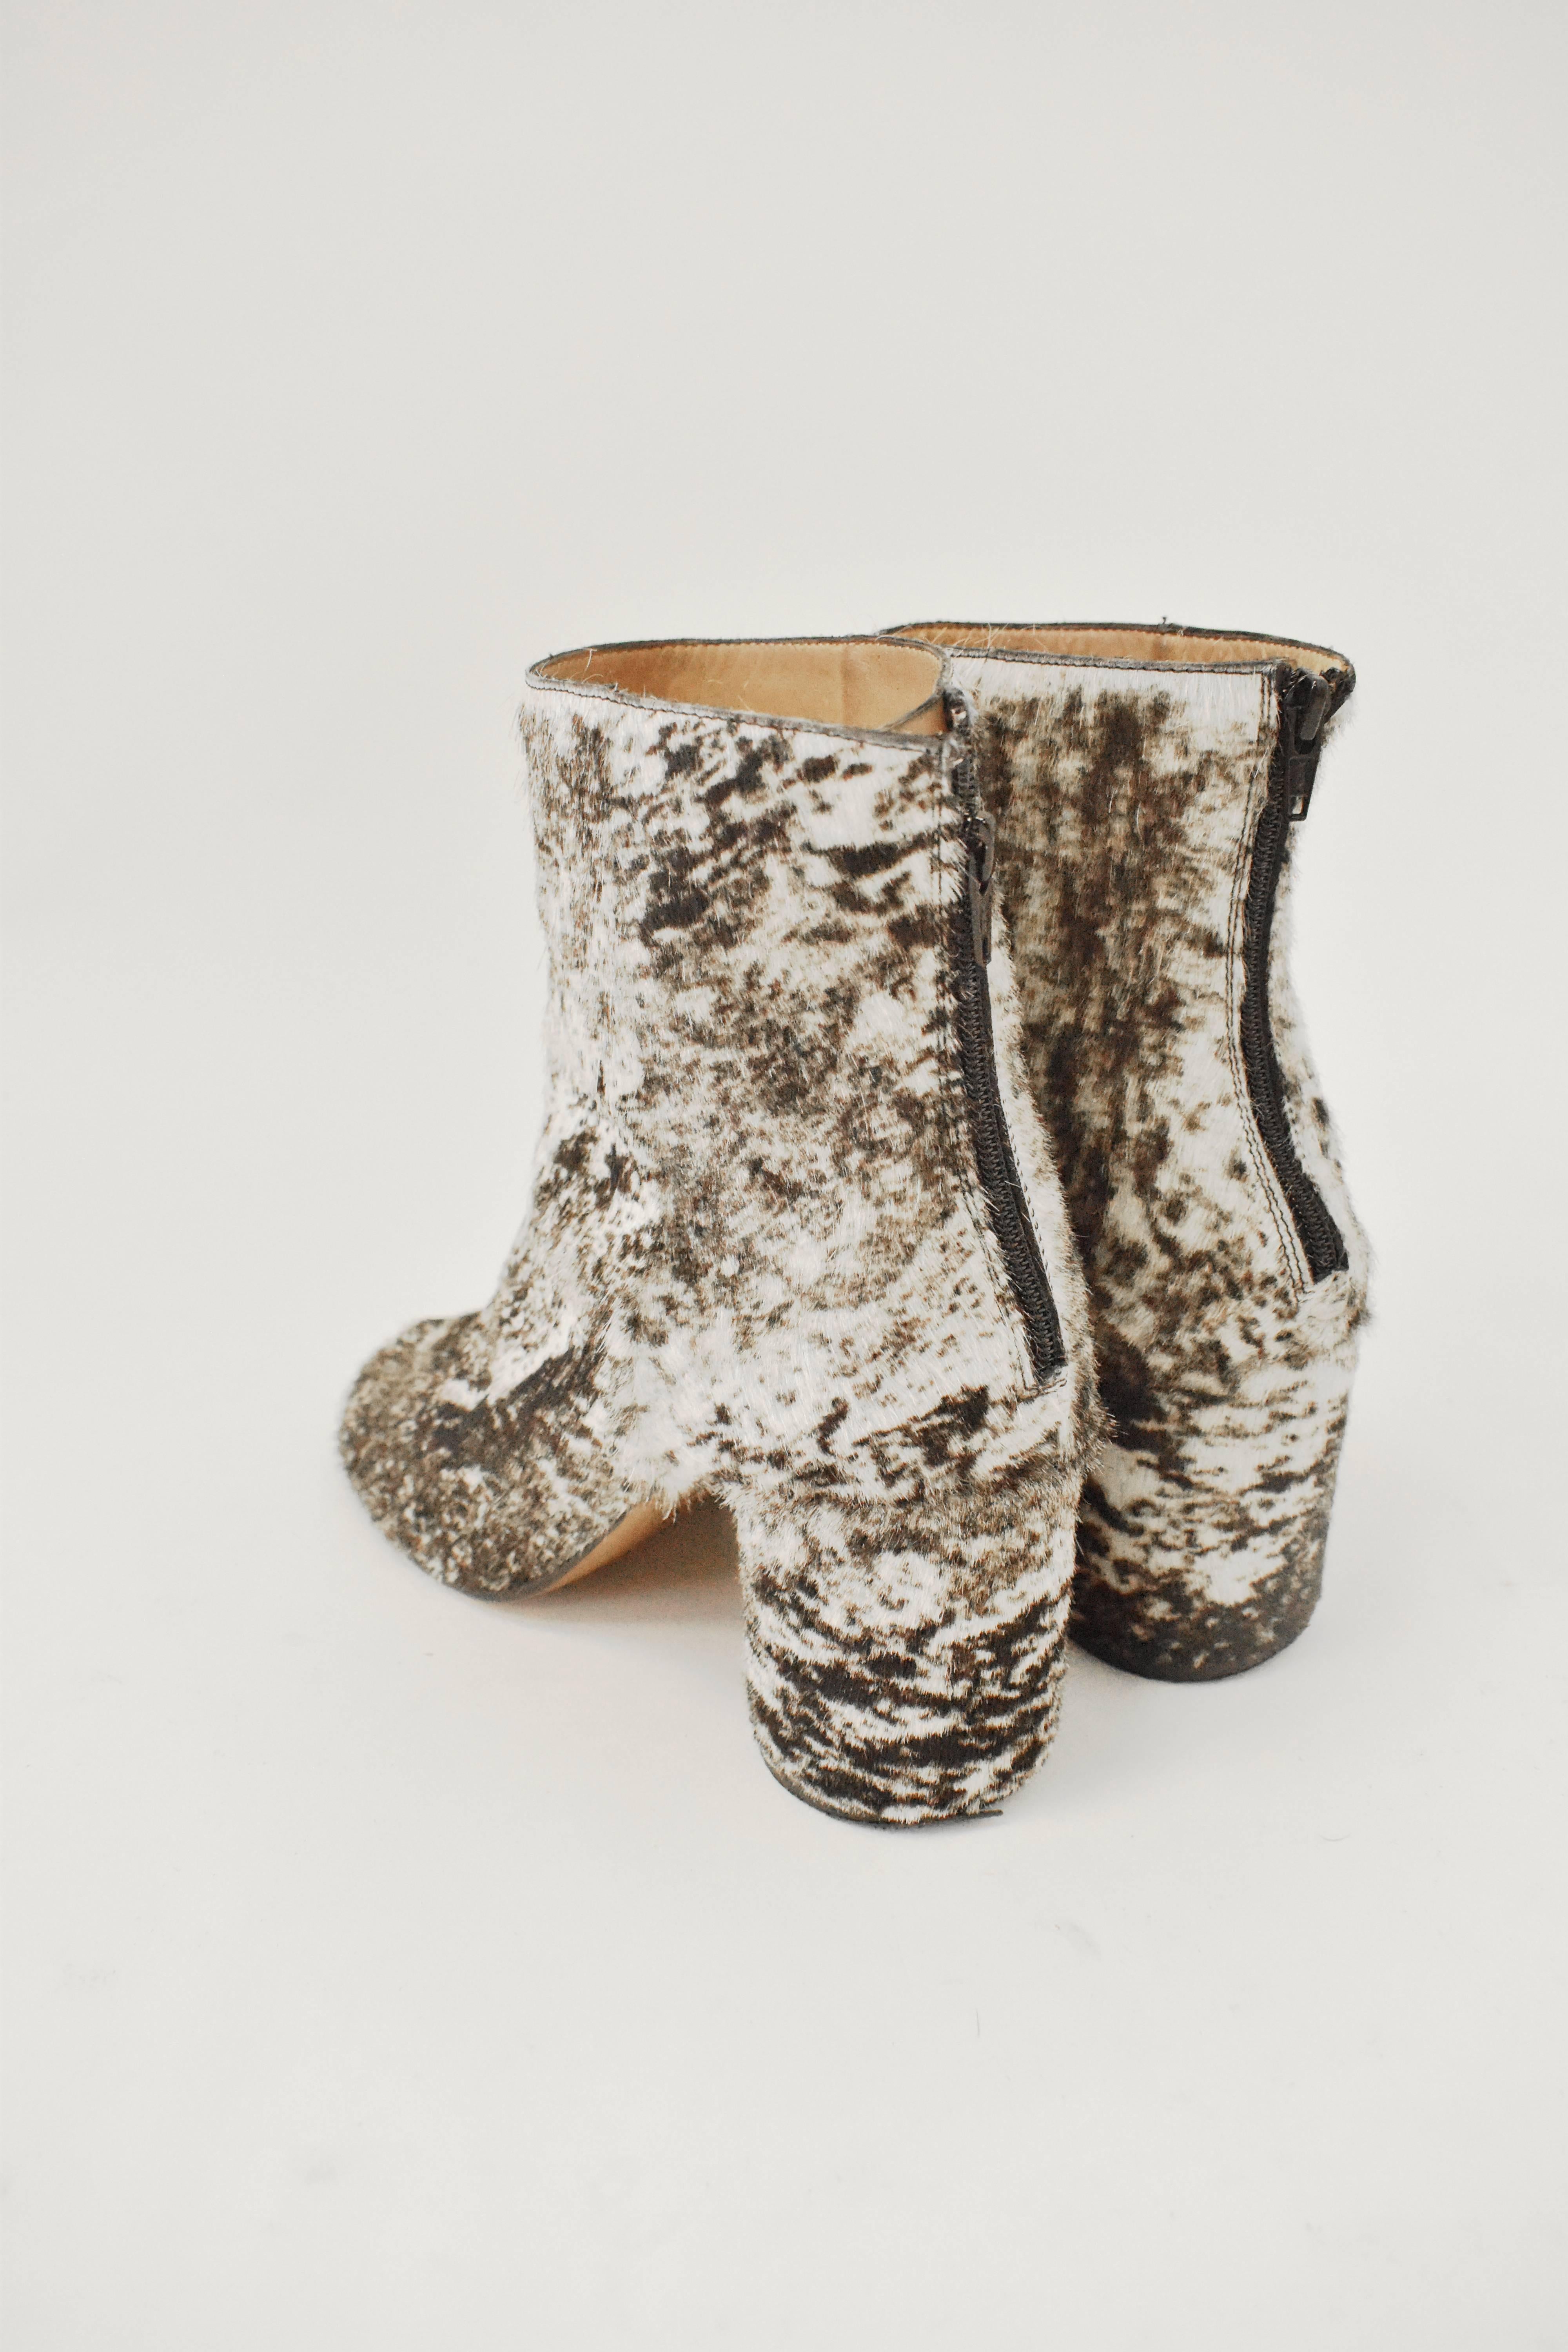 Maison Martin Margiela White and Brown Ponyskin ‘Socks’ Ankle Boots In Good Condition For Sale In London, GB